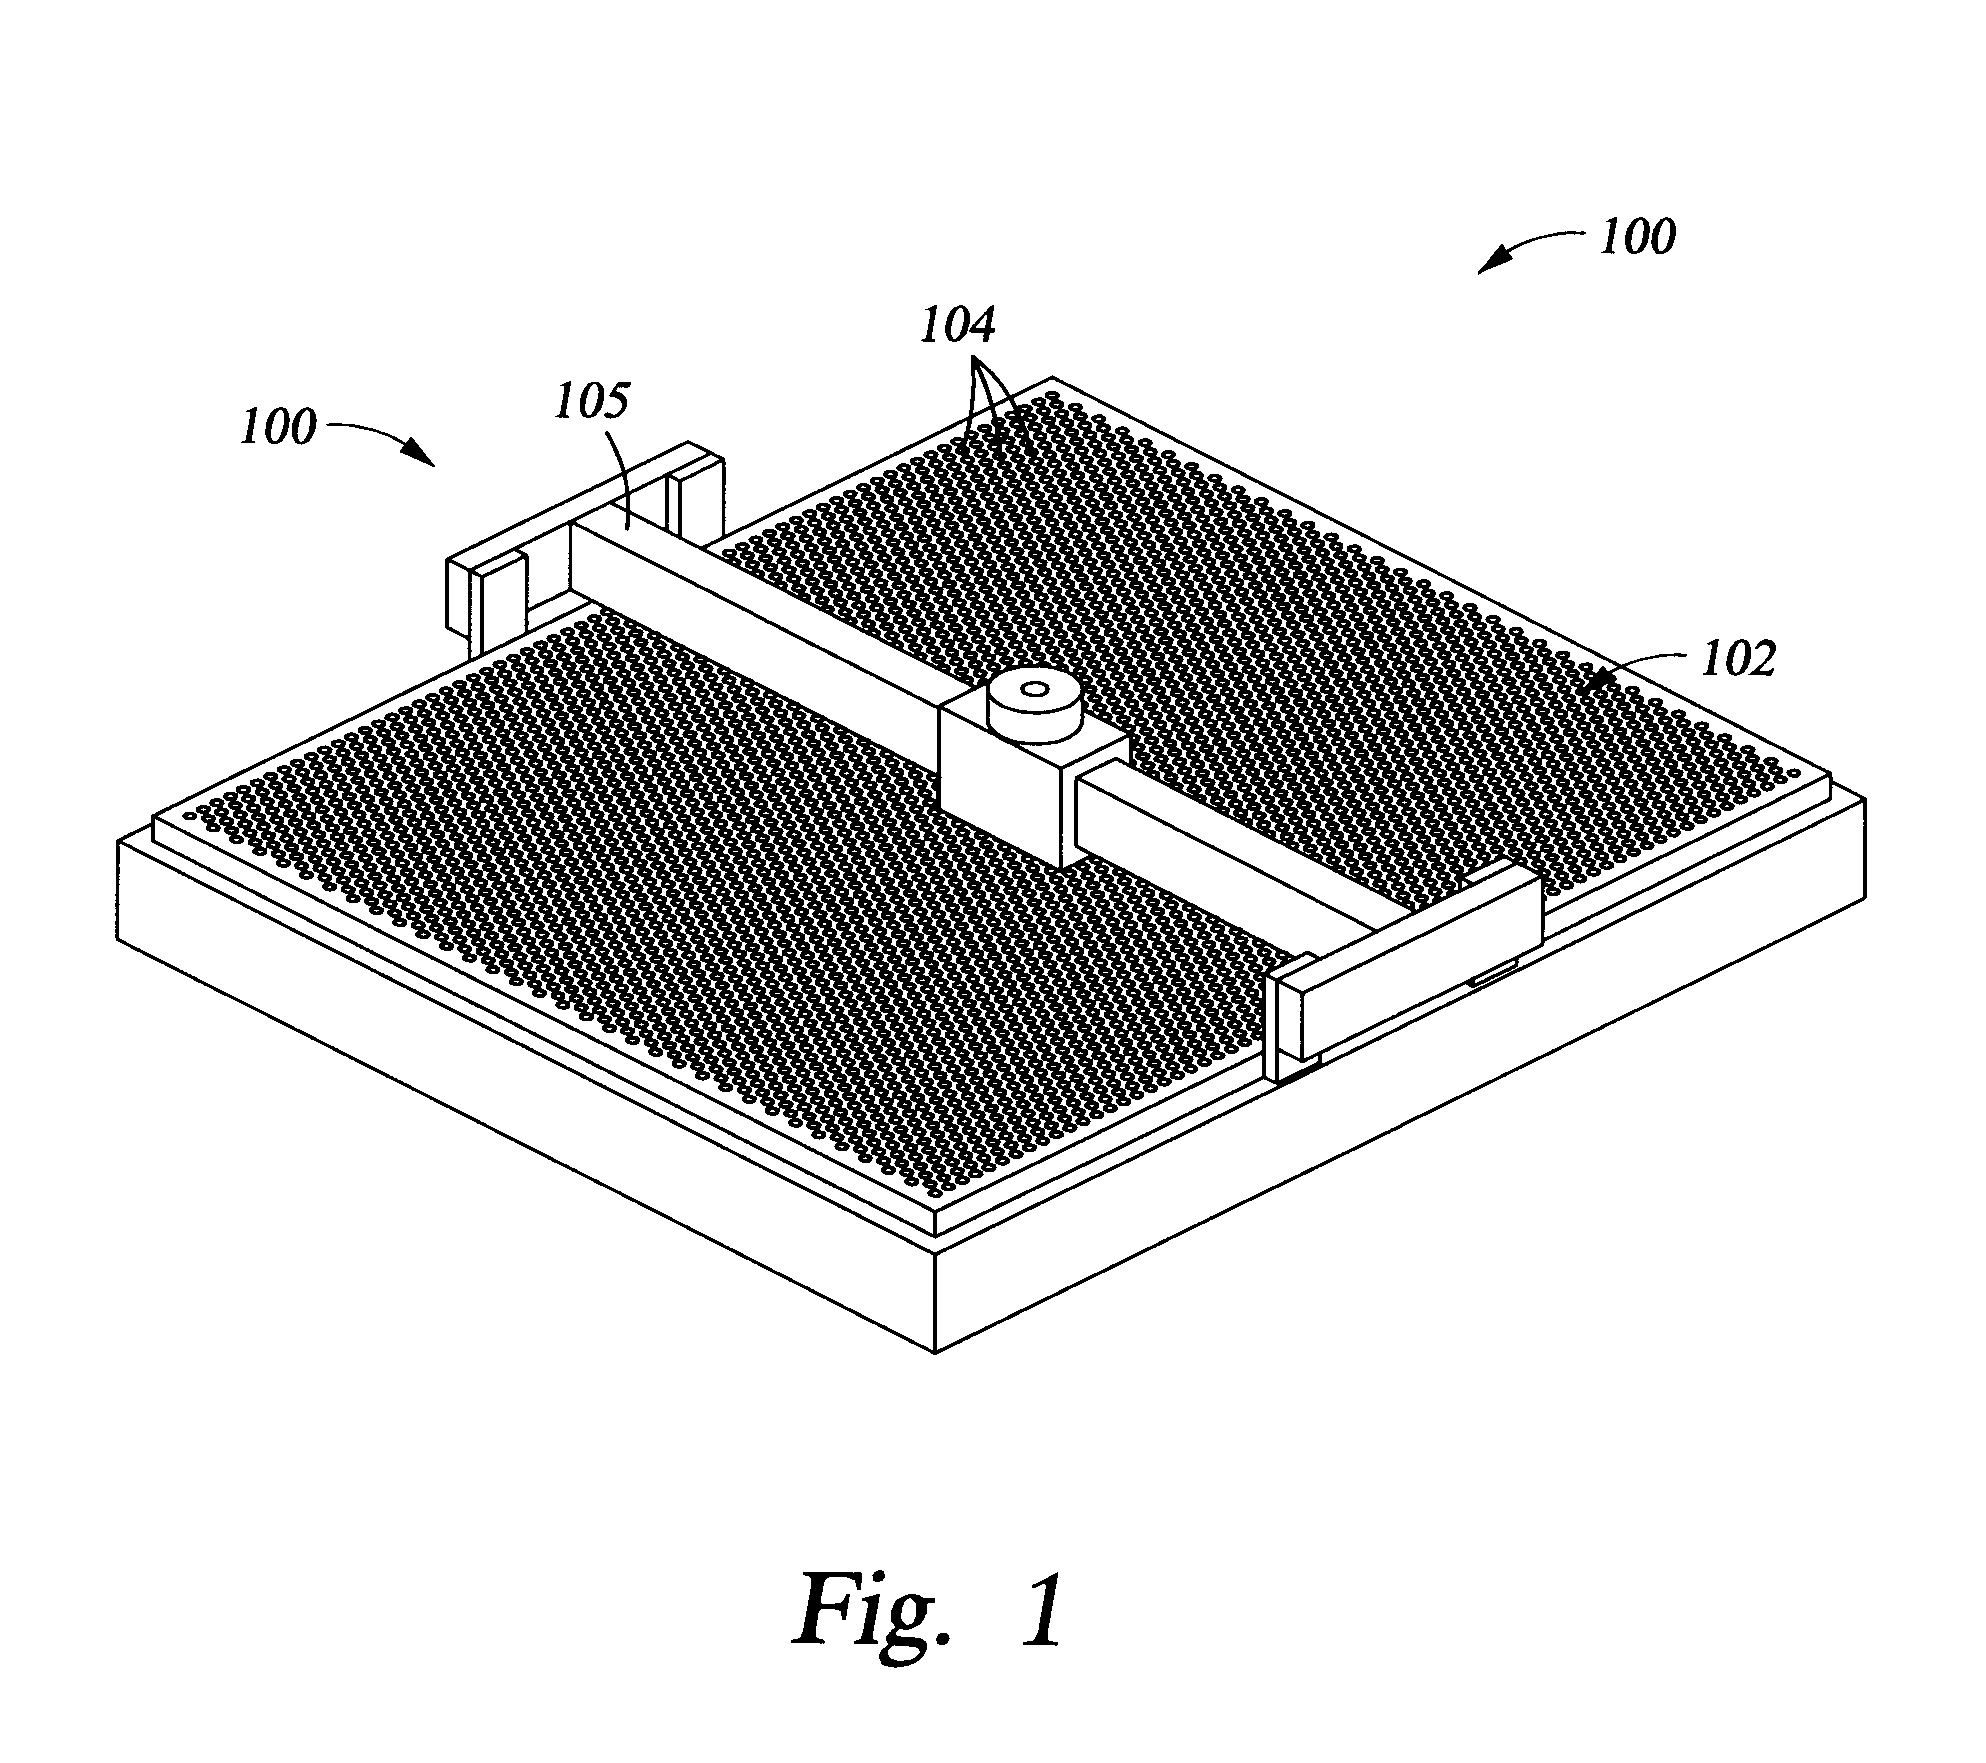 Particle reduction on surfaces of chemical vapor deposition processing apparatus